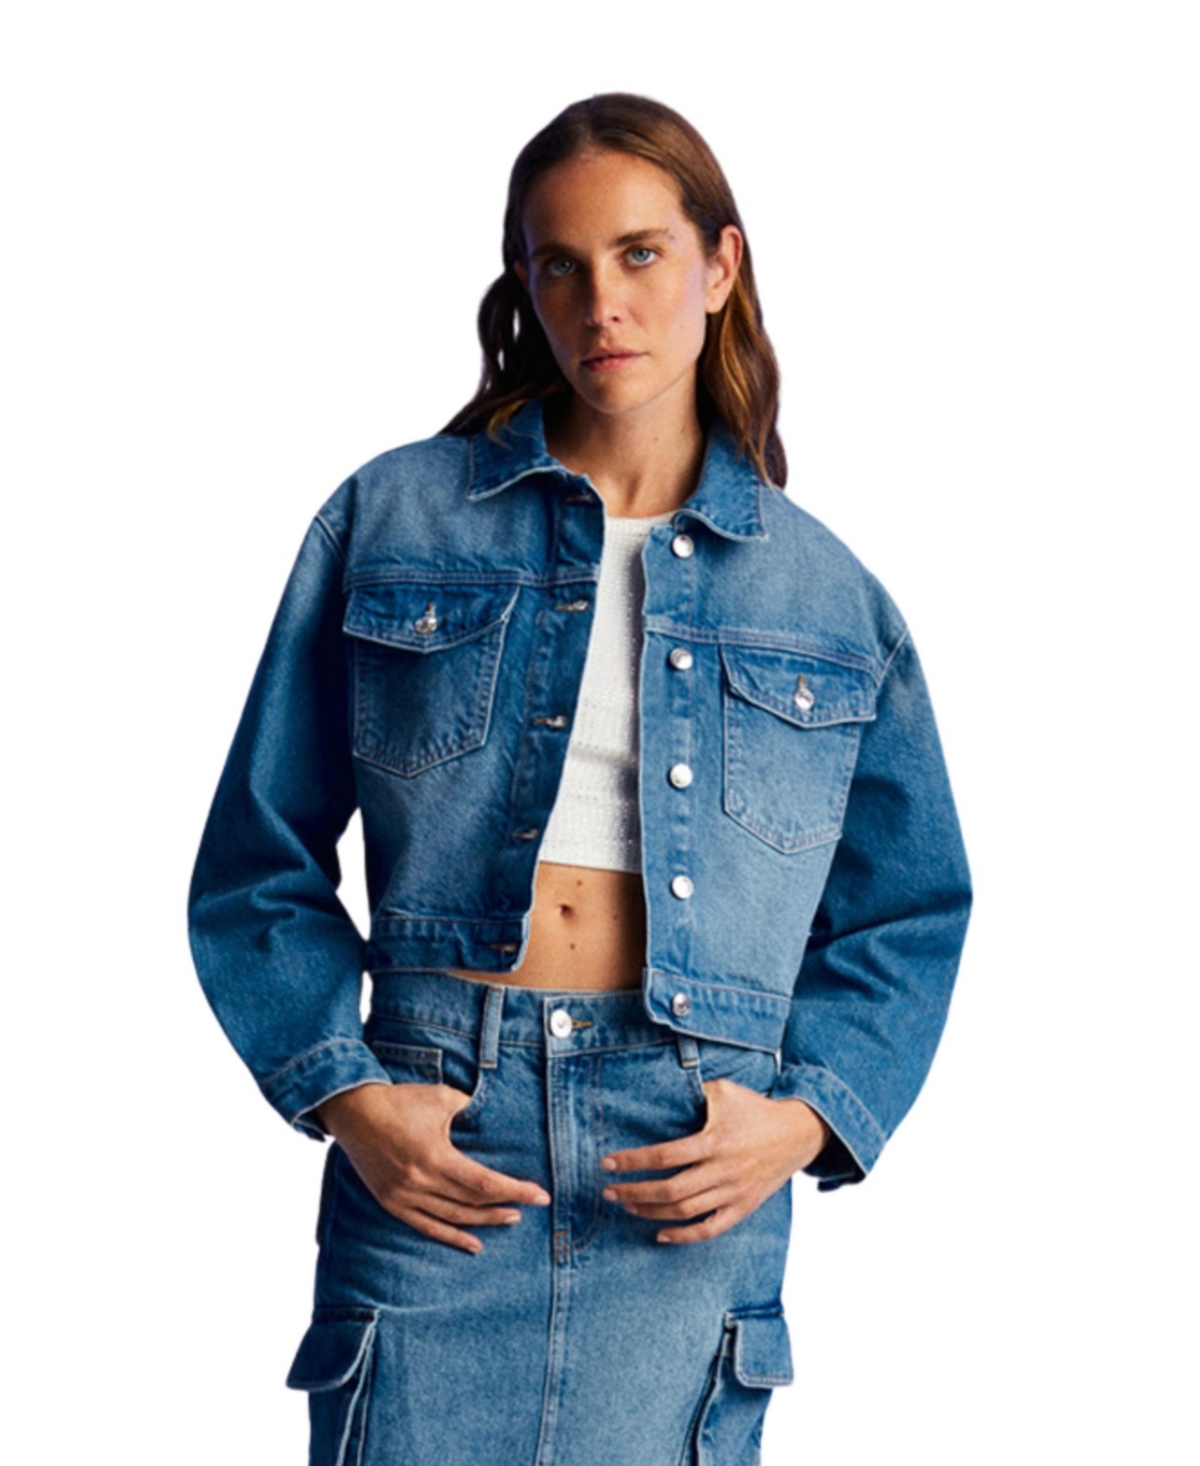 Women's Denim Jacket with Stone Embroidery - Blue